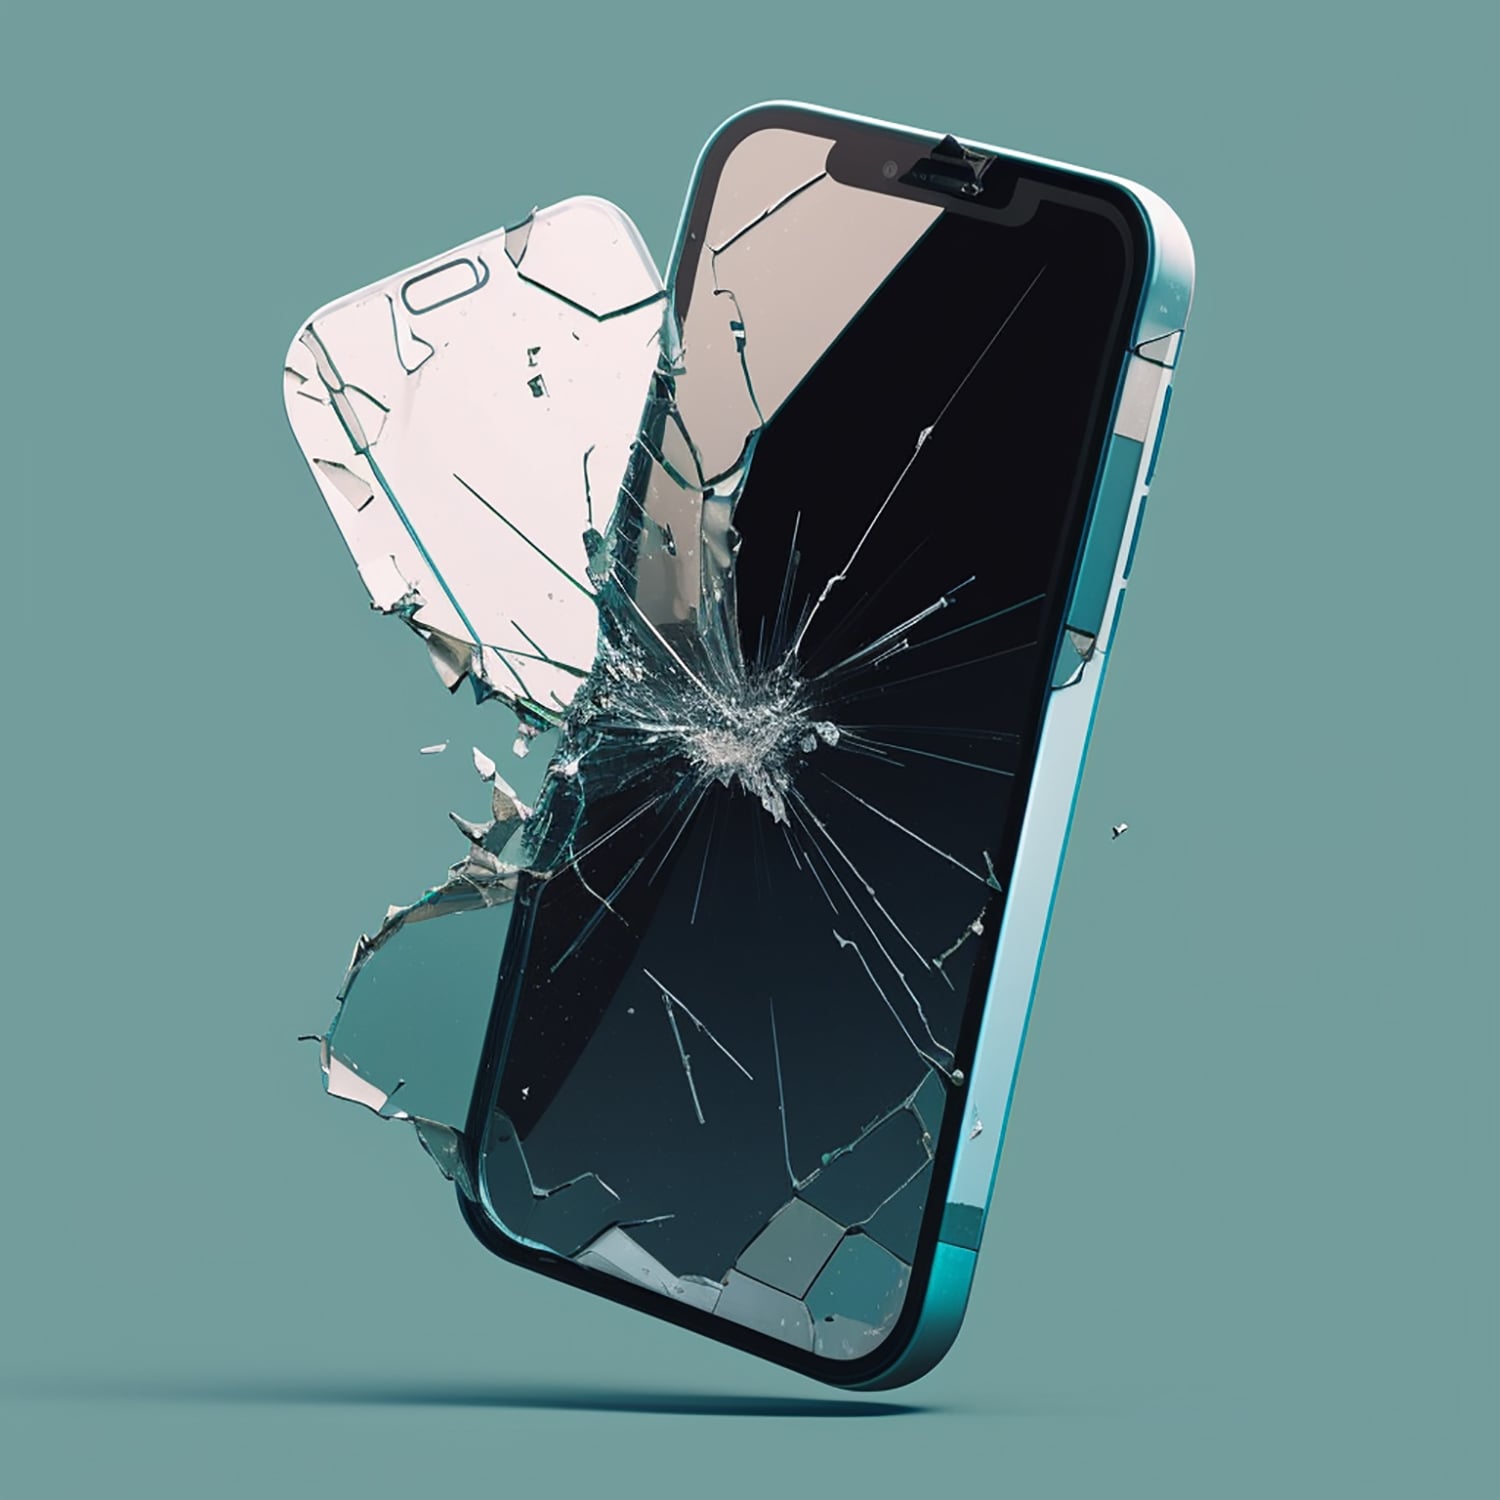 Read more about the article 10 ways to protect your device from breaking